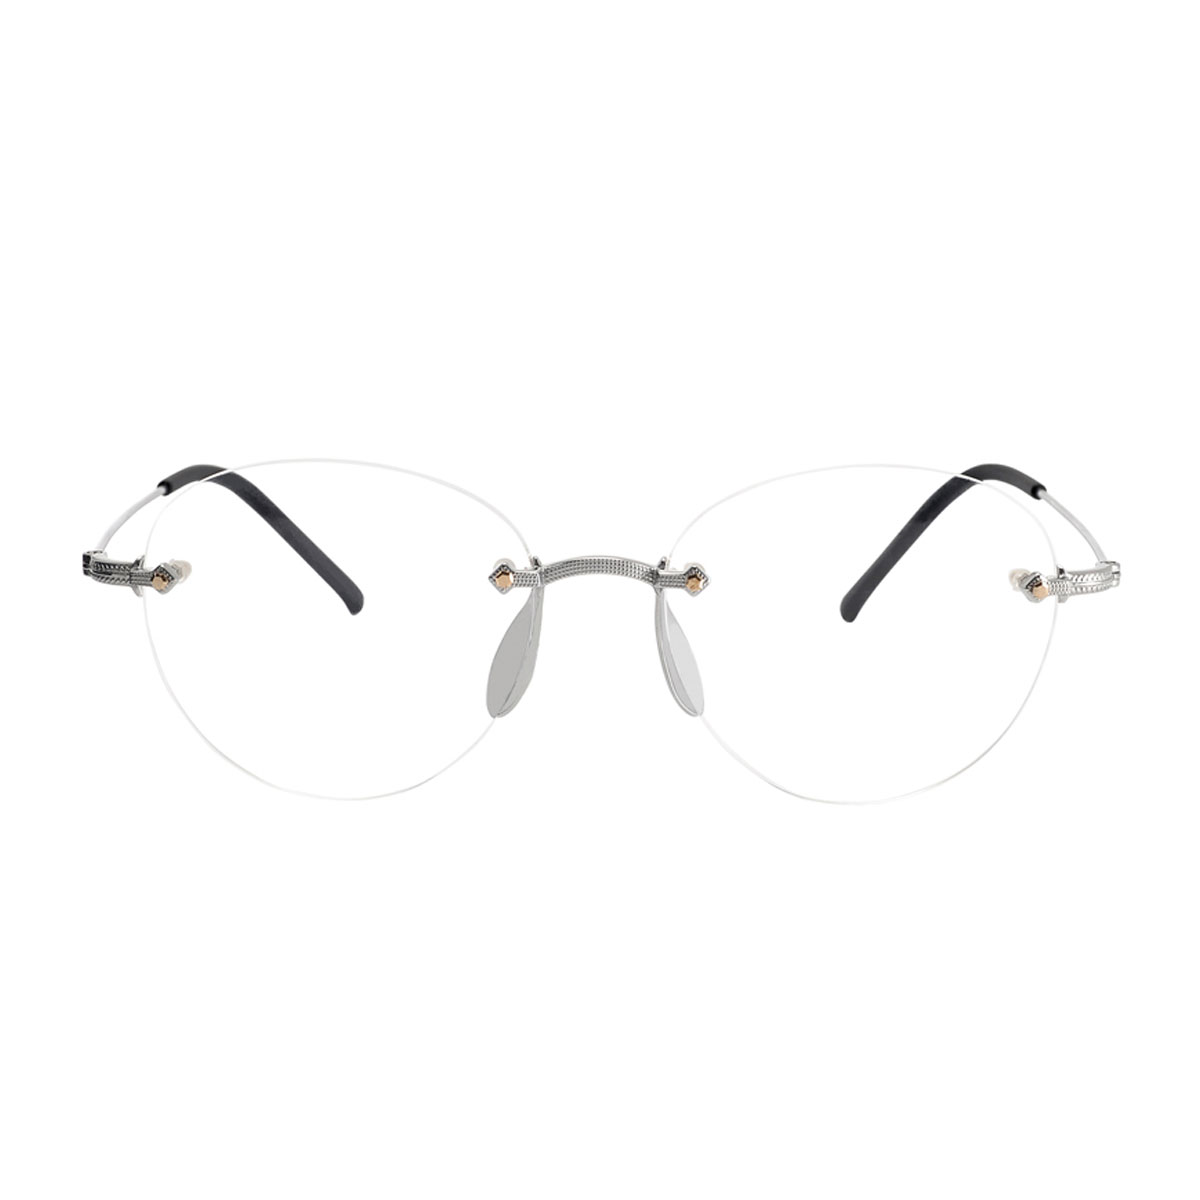 WINLA 8005 C03 Rimless Optical frame with adjustable nose pad price in  Egypt,  Egypt